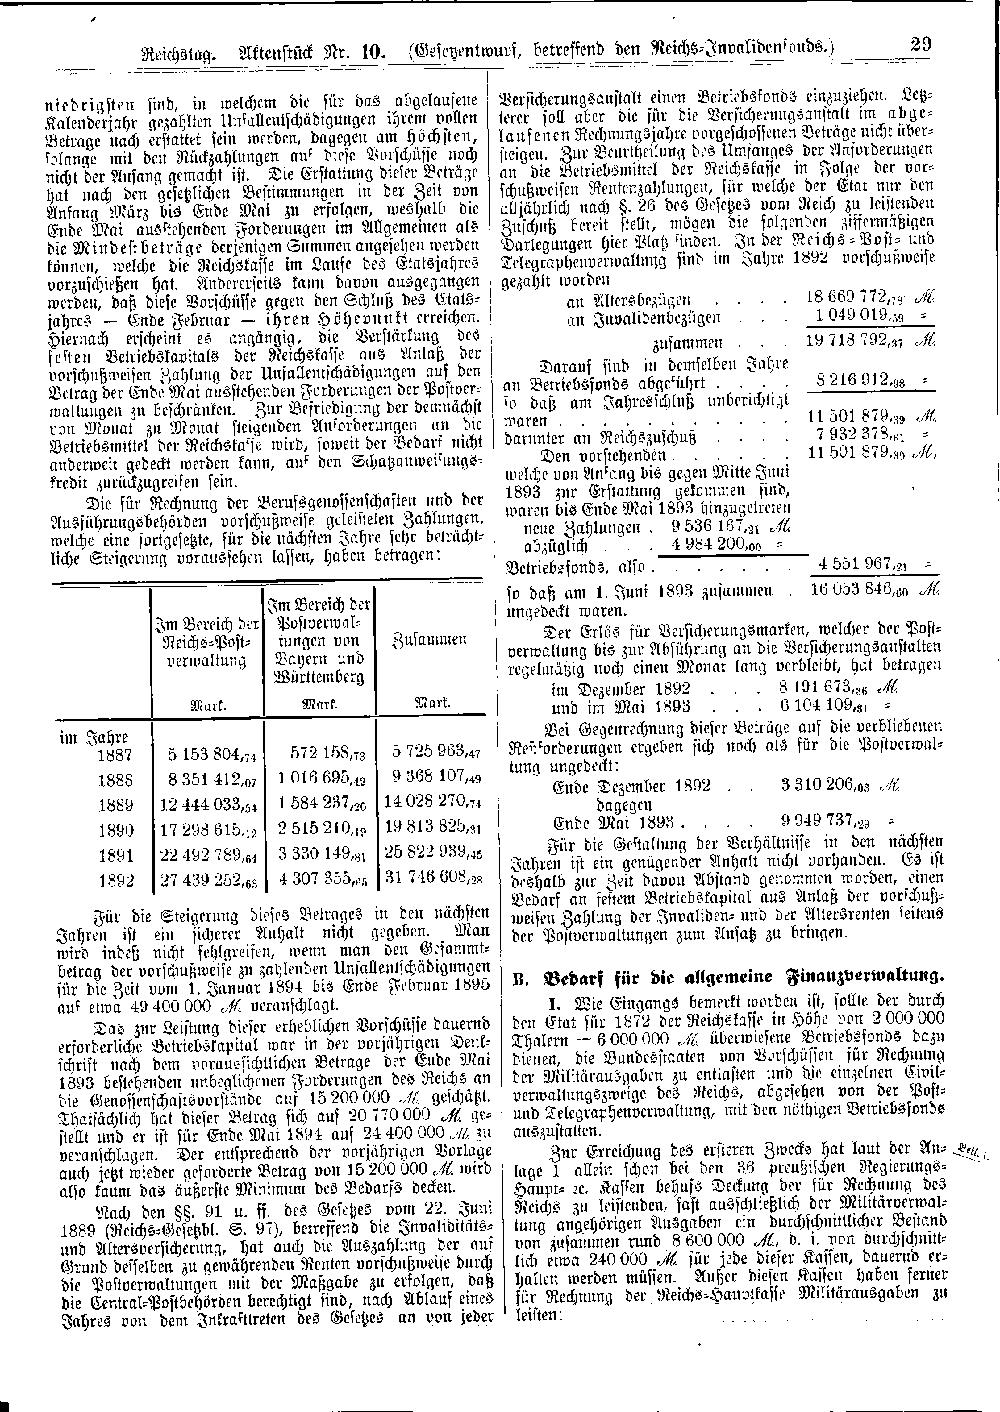 Scan of page 29